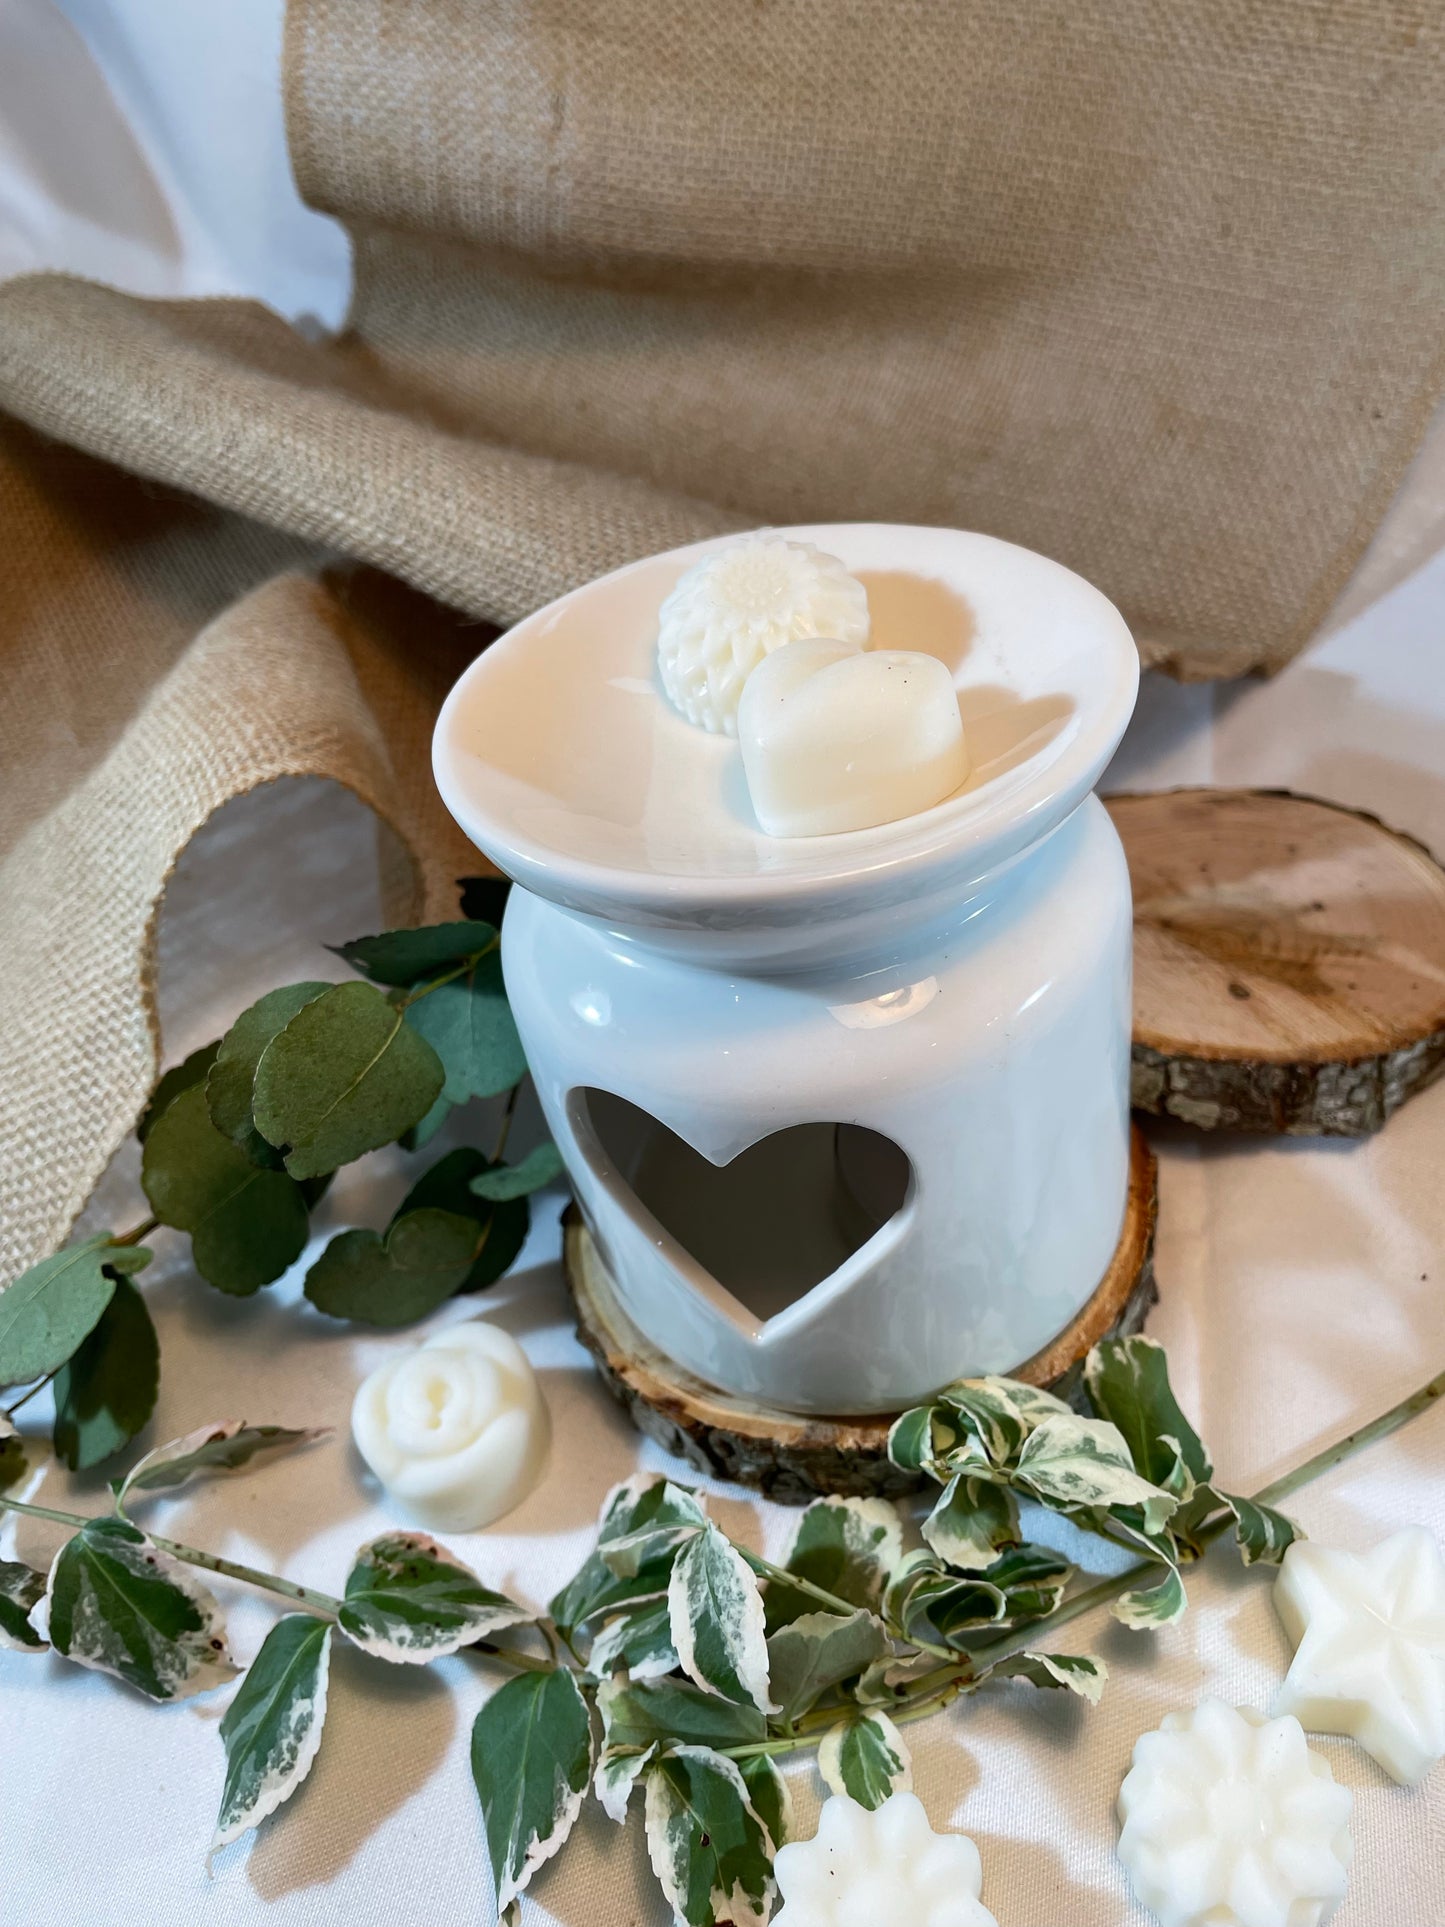 cute heart wax melt burner in a gift box with hand poured wax melts